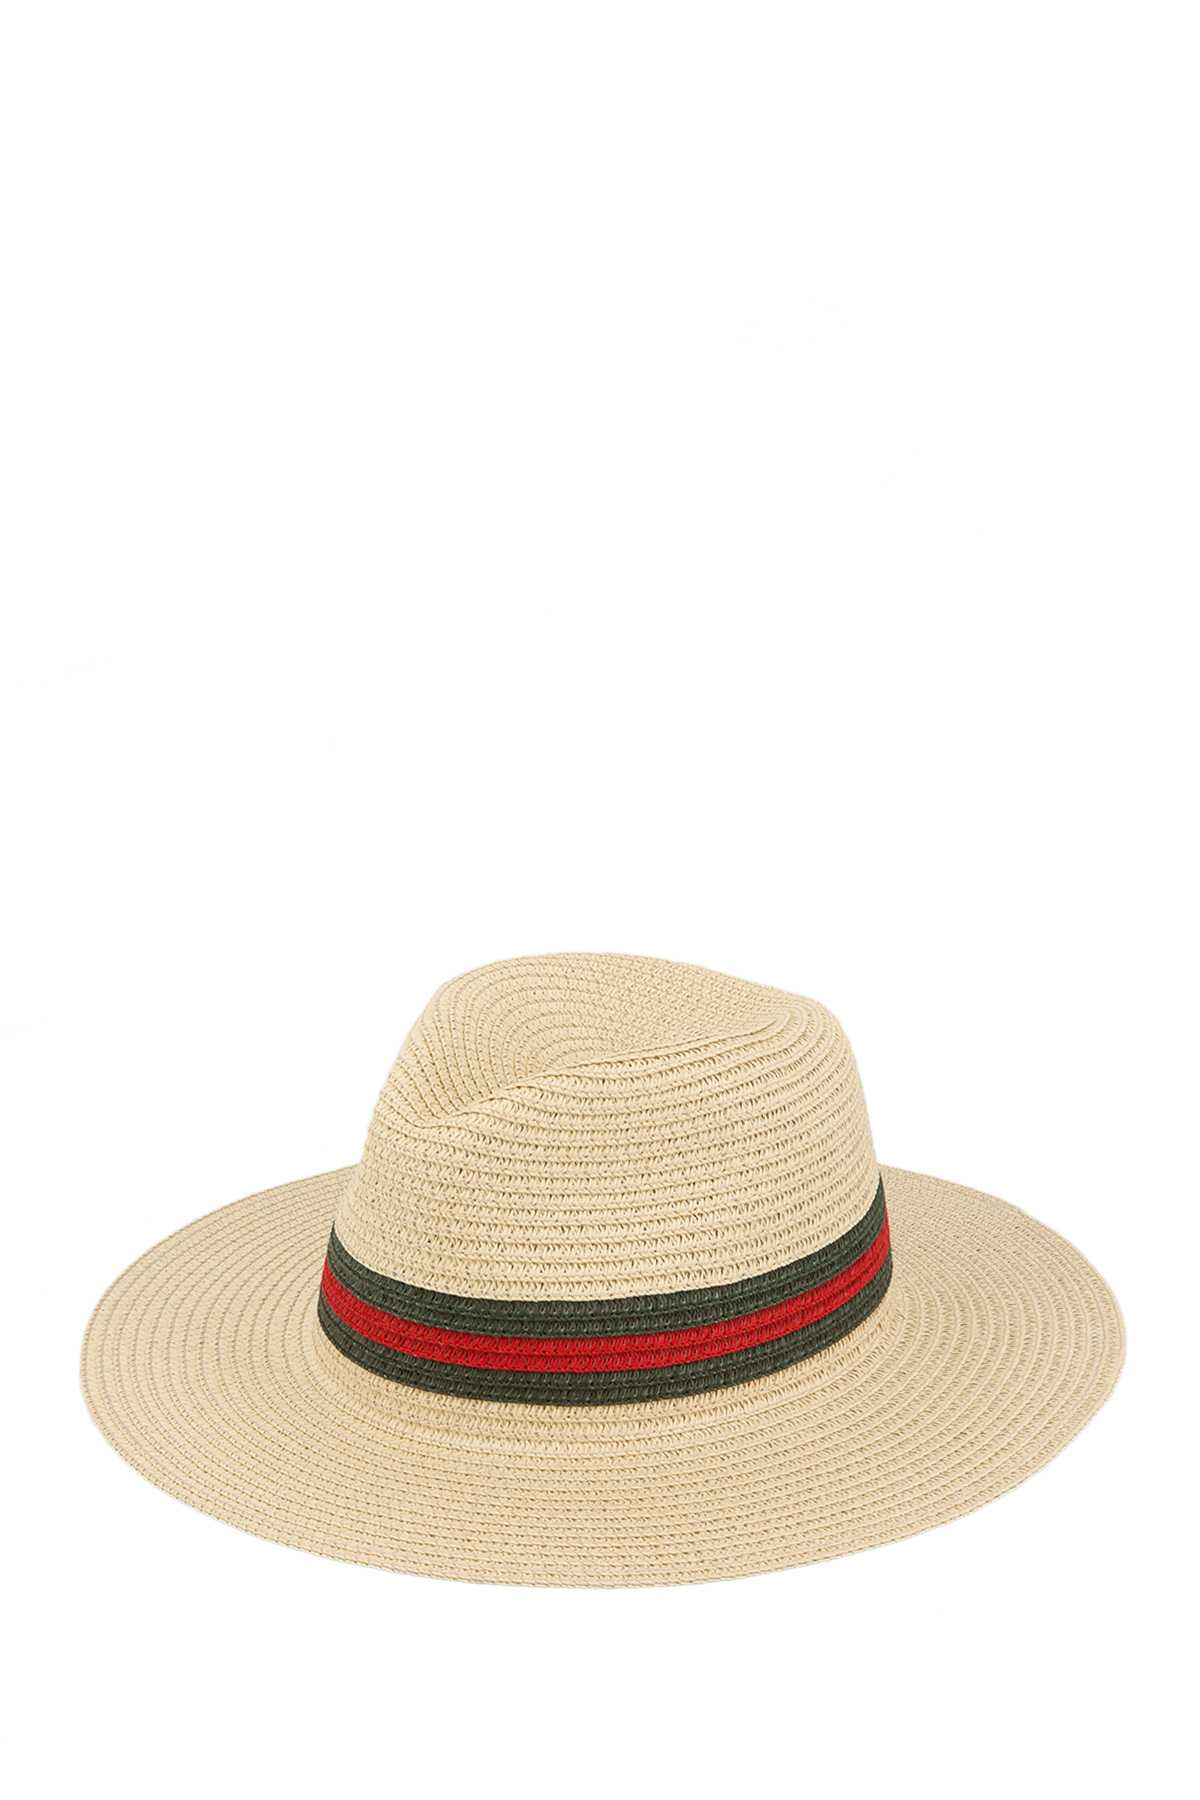 GREEN AND RED ACCENT STRAW FEDORA HAT